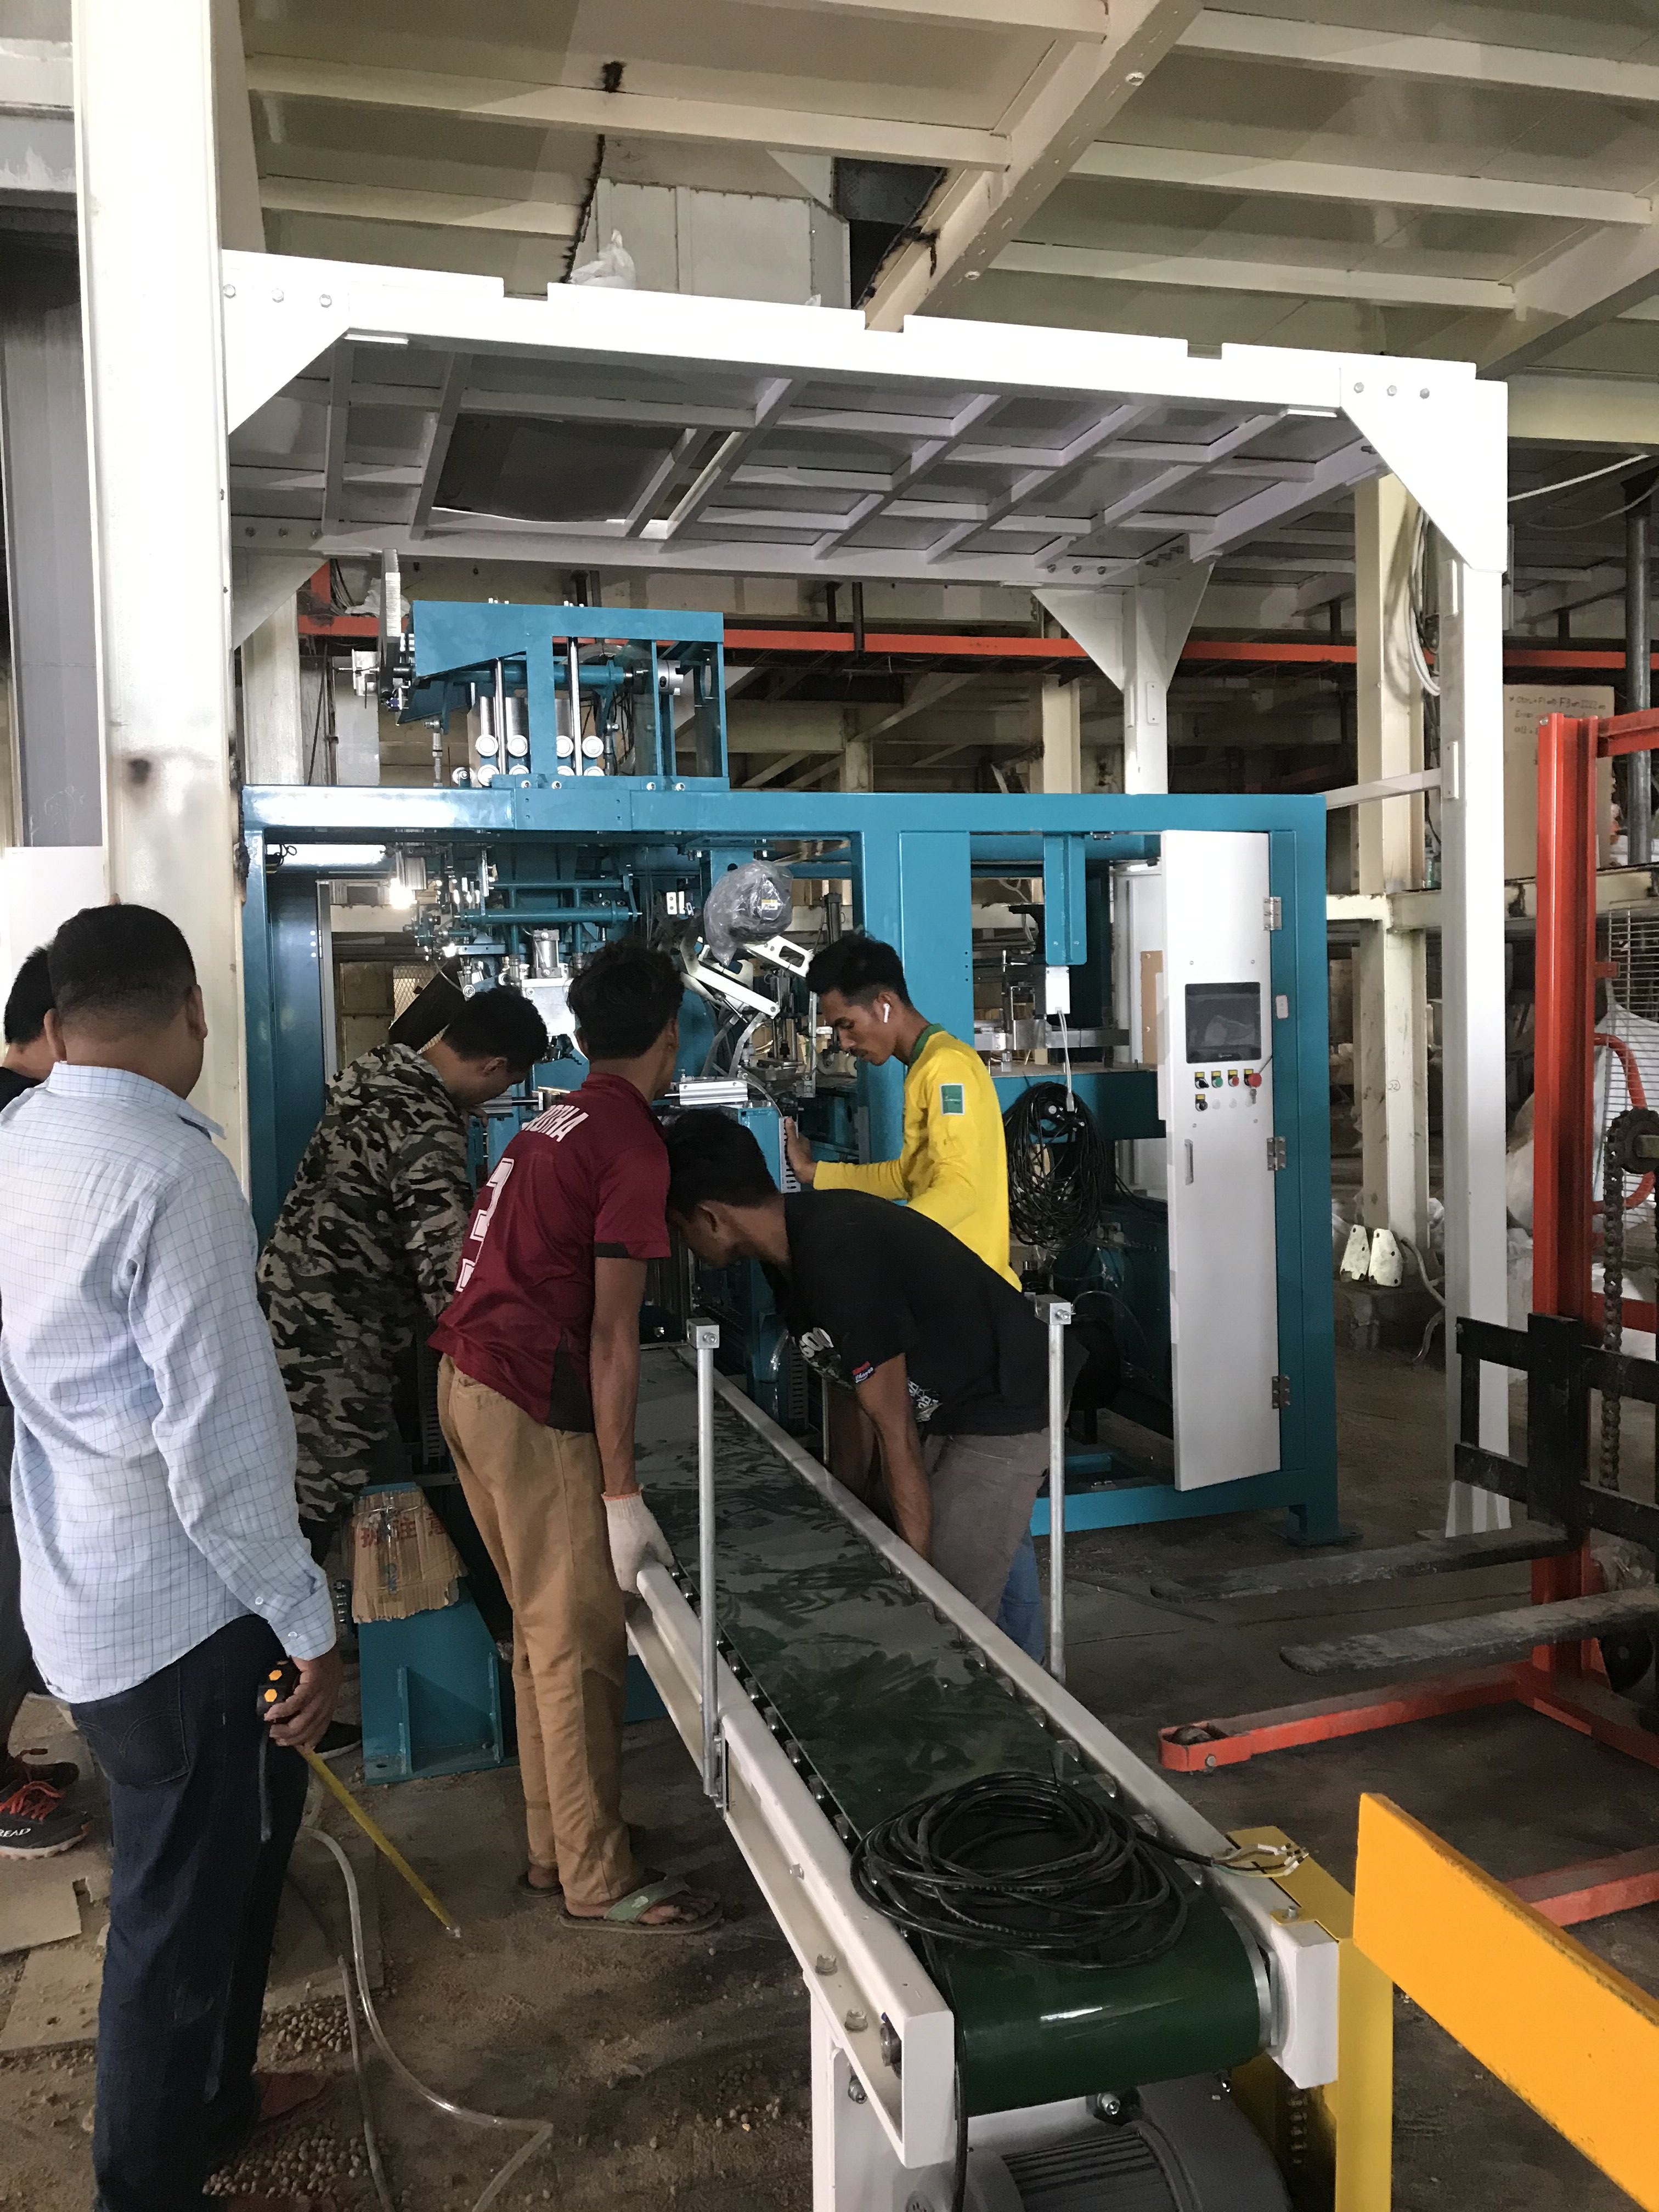 Grains bagging machine Whole Grains packing machine fully Automatic Packing Palletizing Line, Fully Automatic Packing Line, Fully Automatic Bagging Line, Fully Automatic filling and packaging line, au